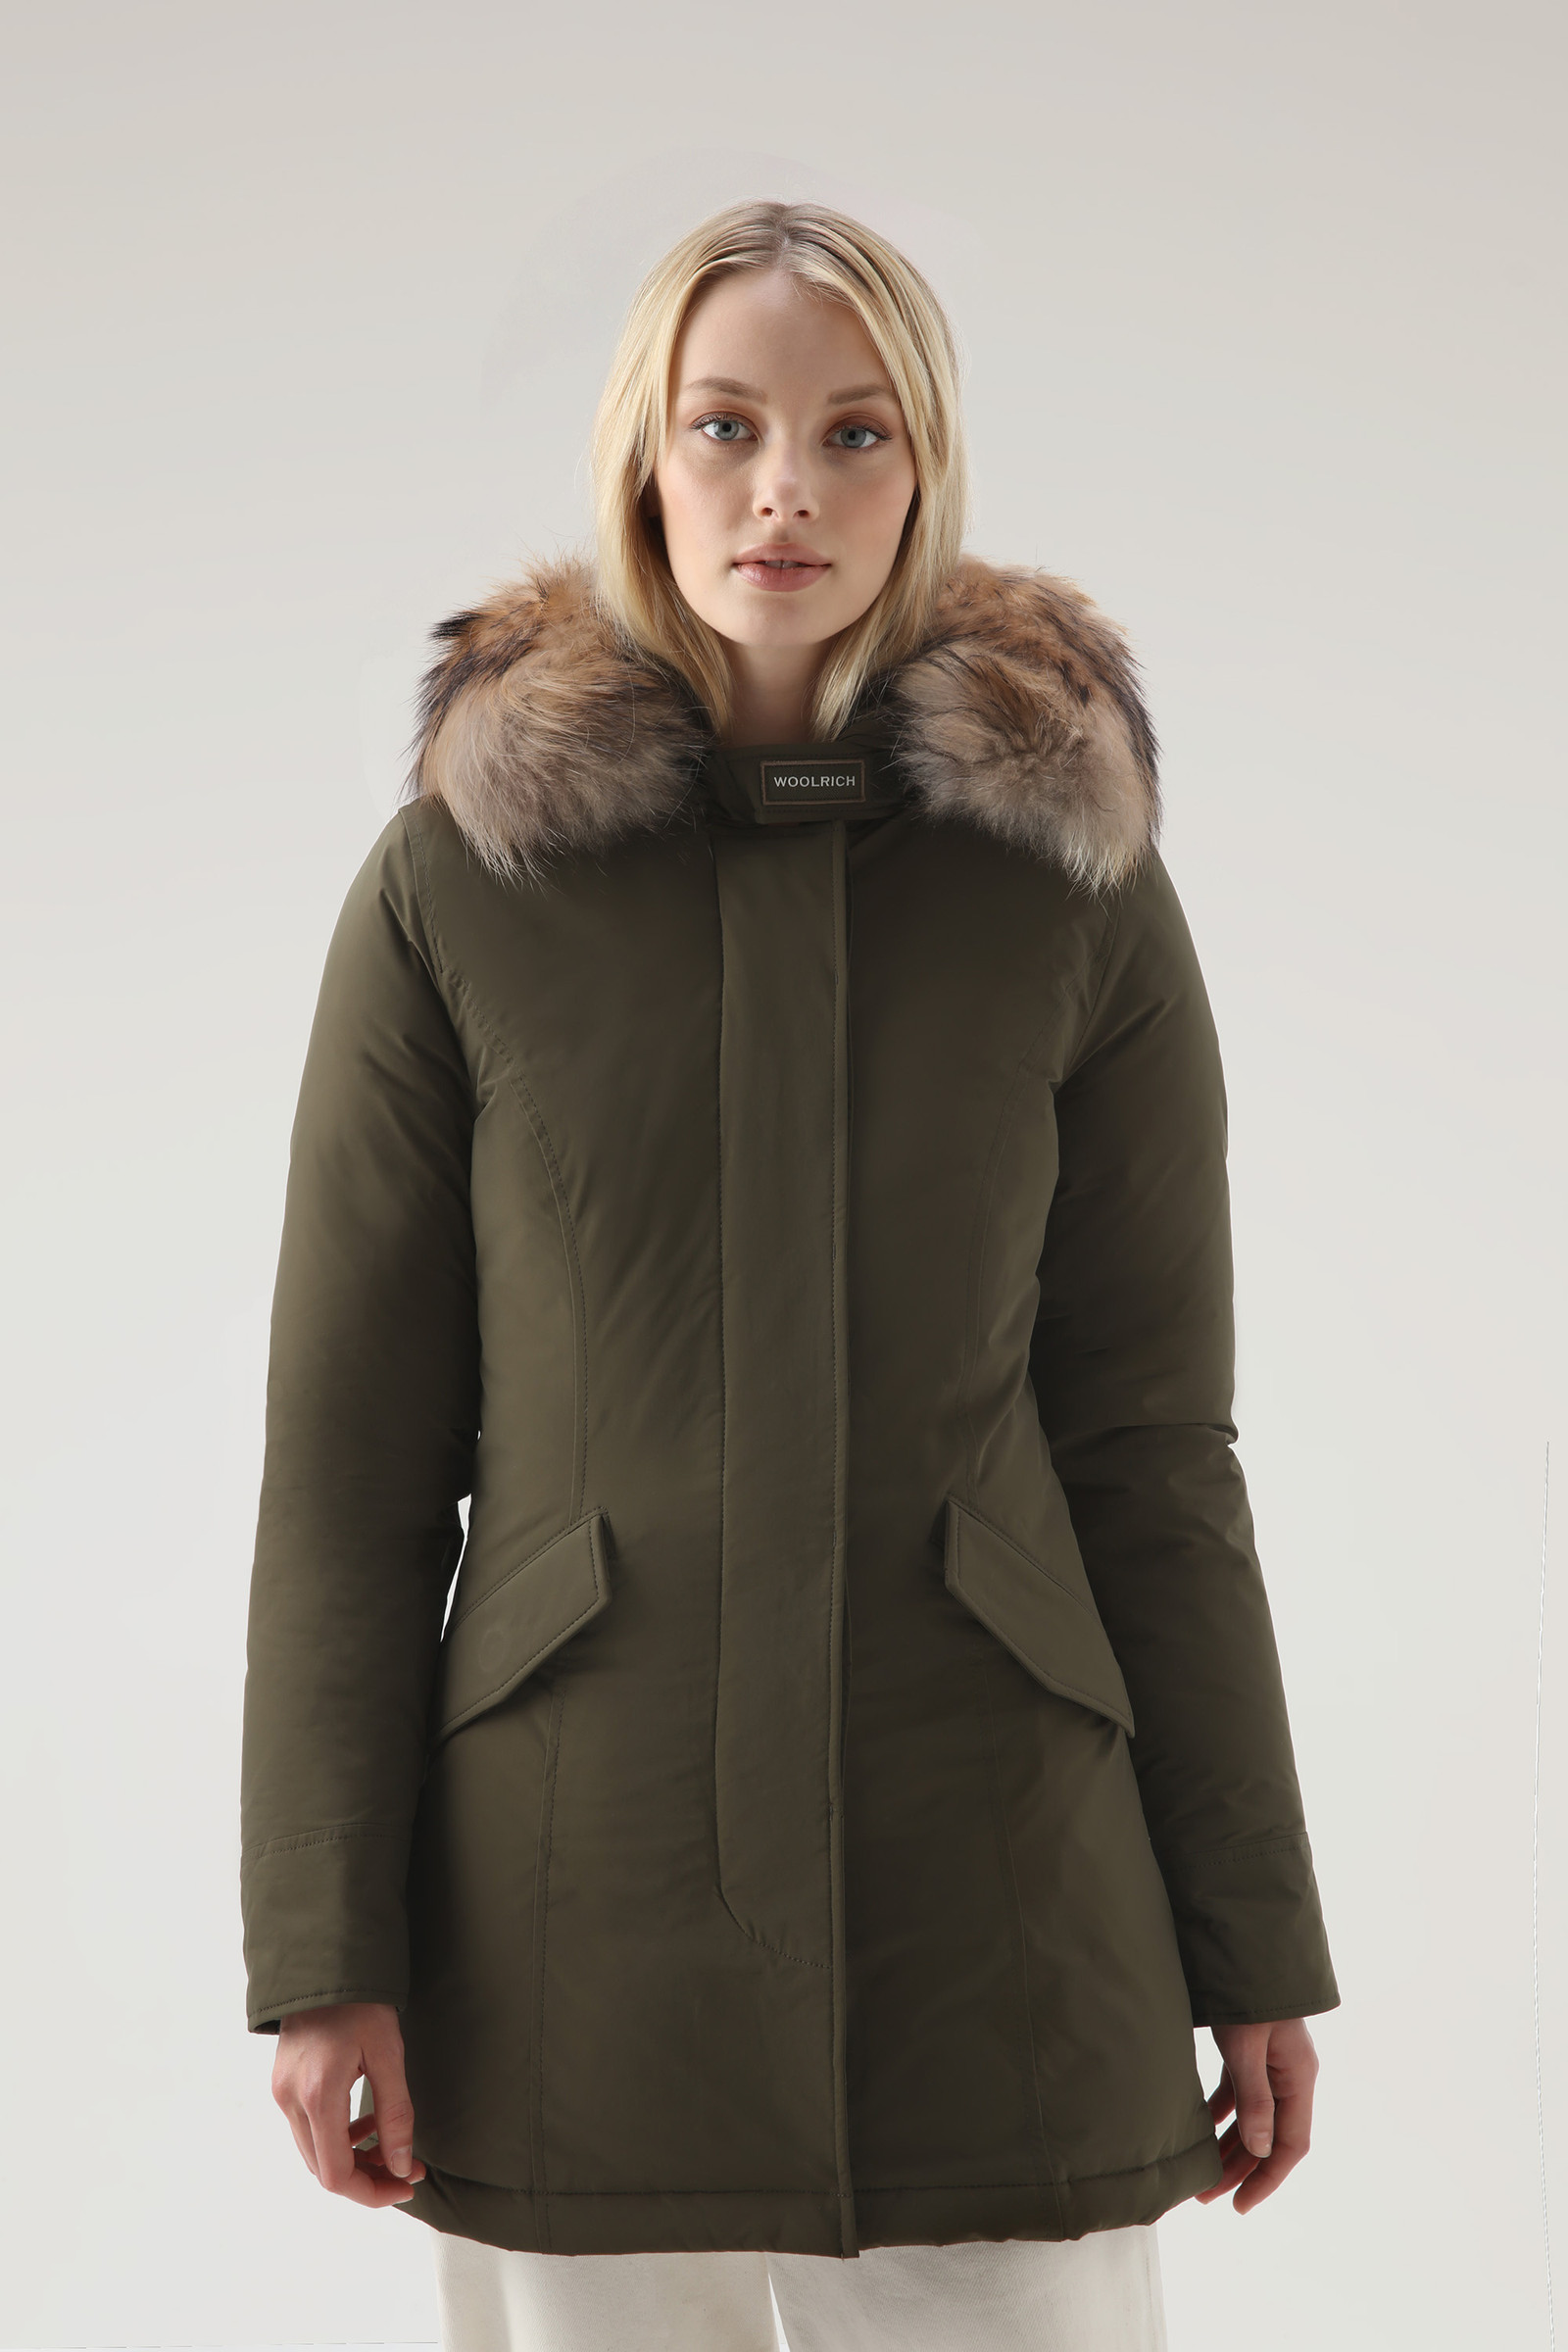 Fundament hovedlandet Skorpe Women's Arctic Parka in Urban Touch with Detachable Fur Green | Woolrich UK